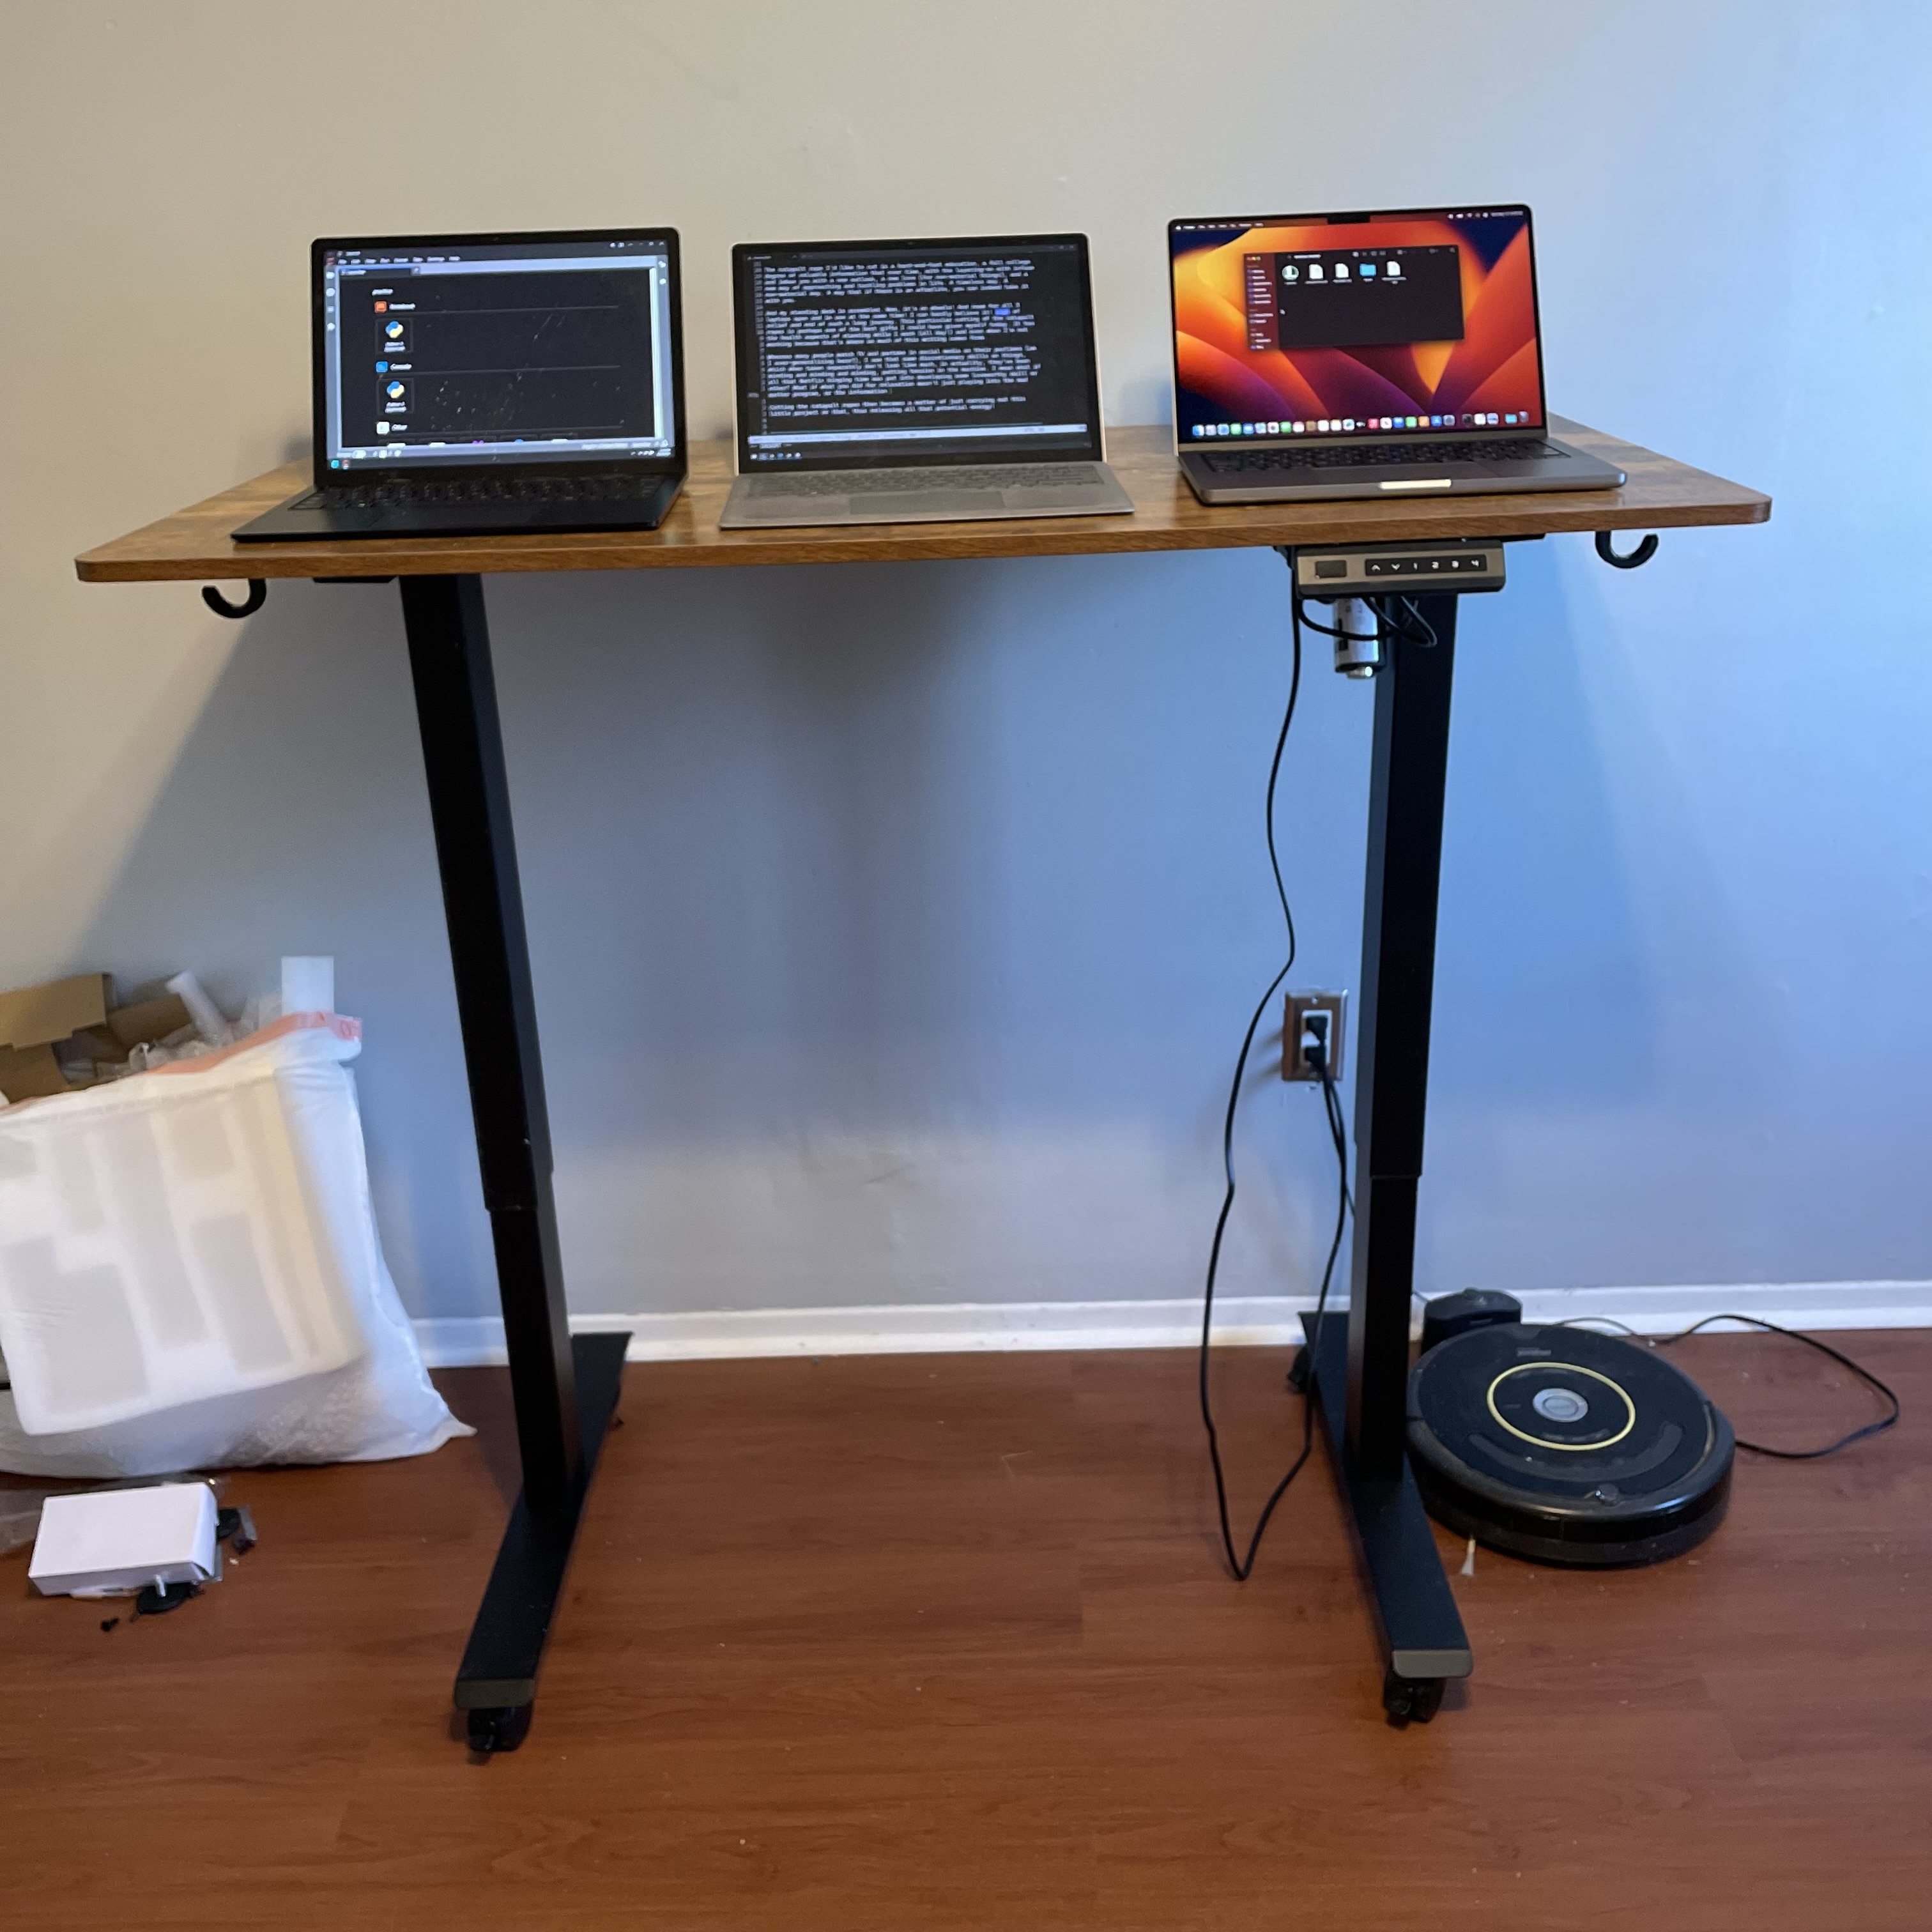 Parallels Between Building Standing Desk And Cutting Catapult Ropes